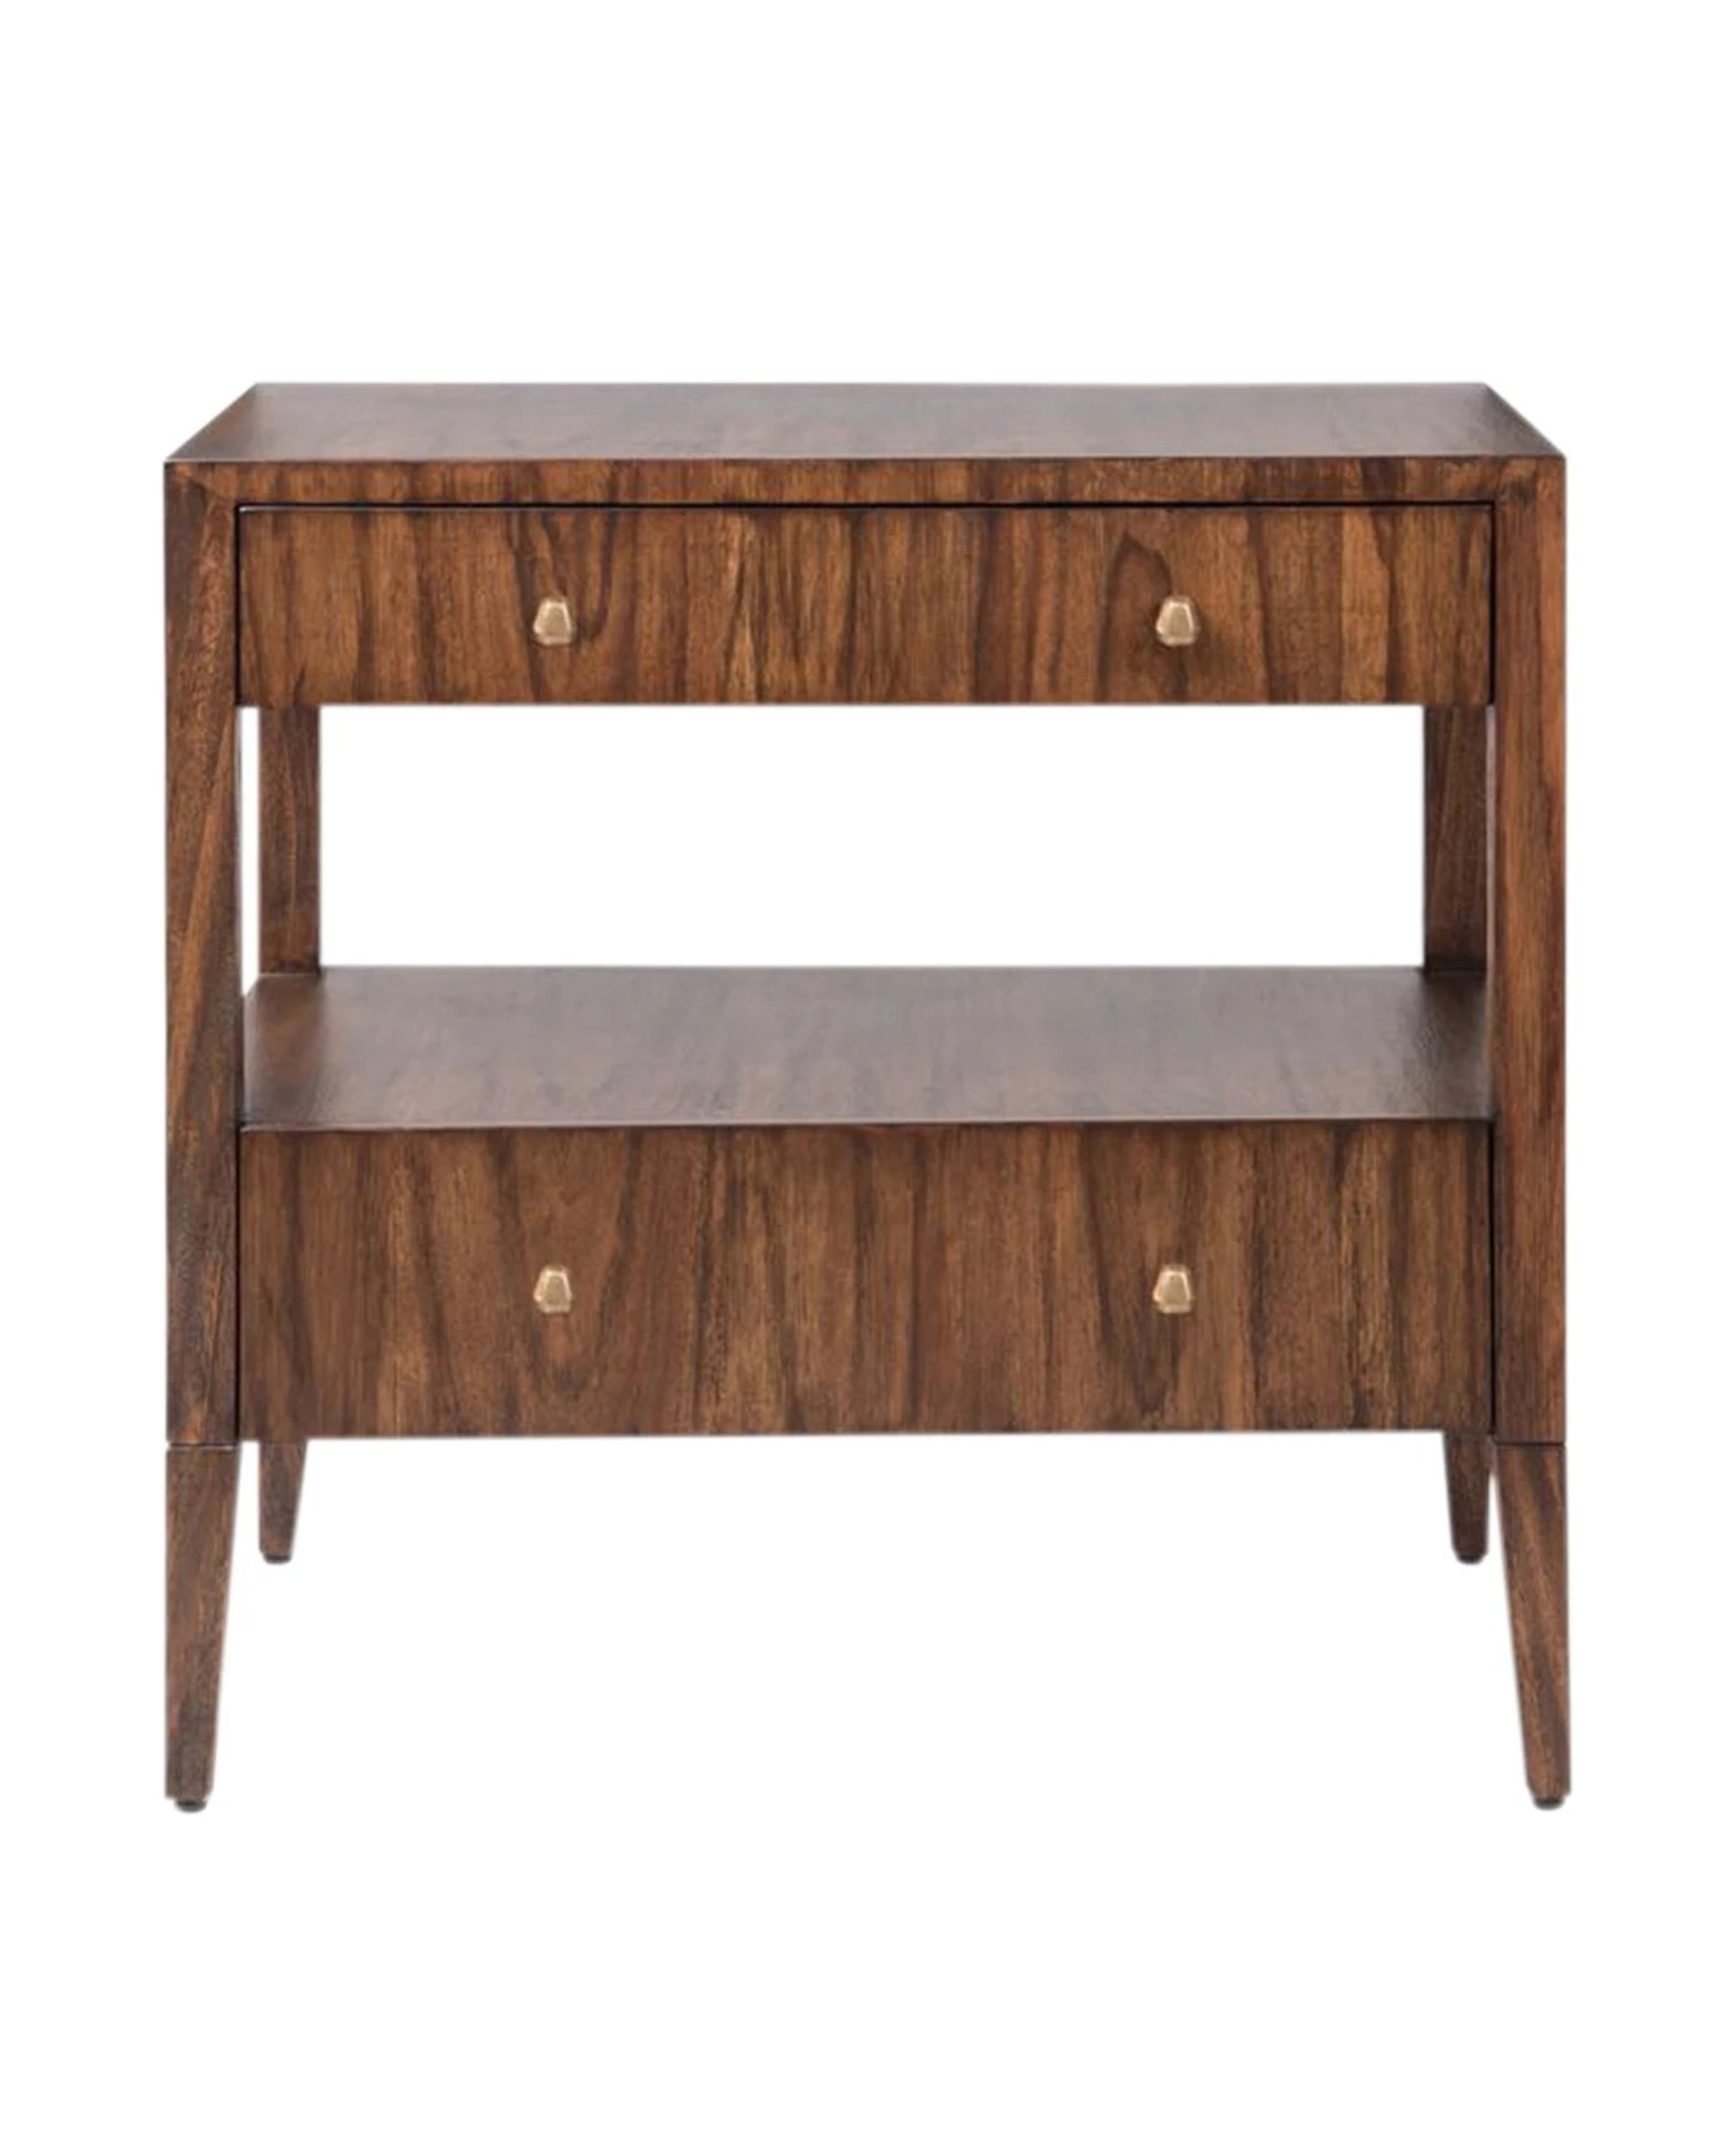 QUIGLEY NIGHTSTAND - McGee & Co.